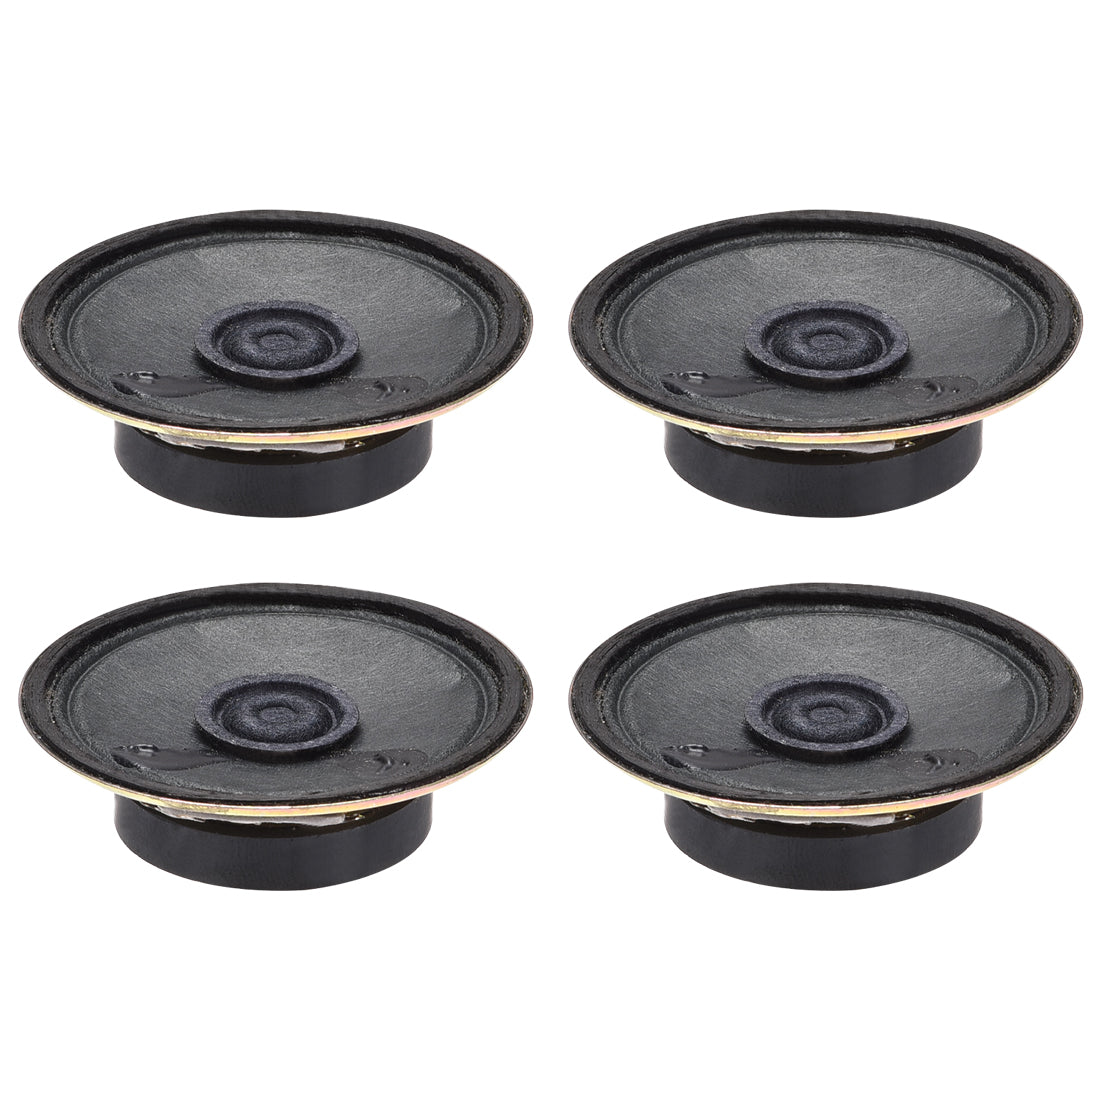 uxcell Uxcell 0.5W 8 Ohm DIY Magnetic Speaker 50mm Round Shape Replacement Loudspeaker 4pcs